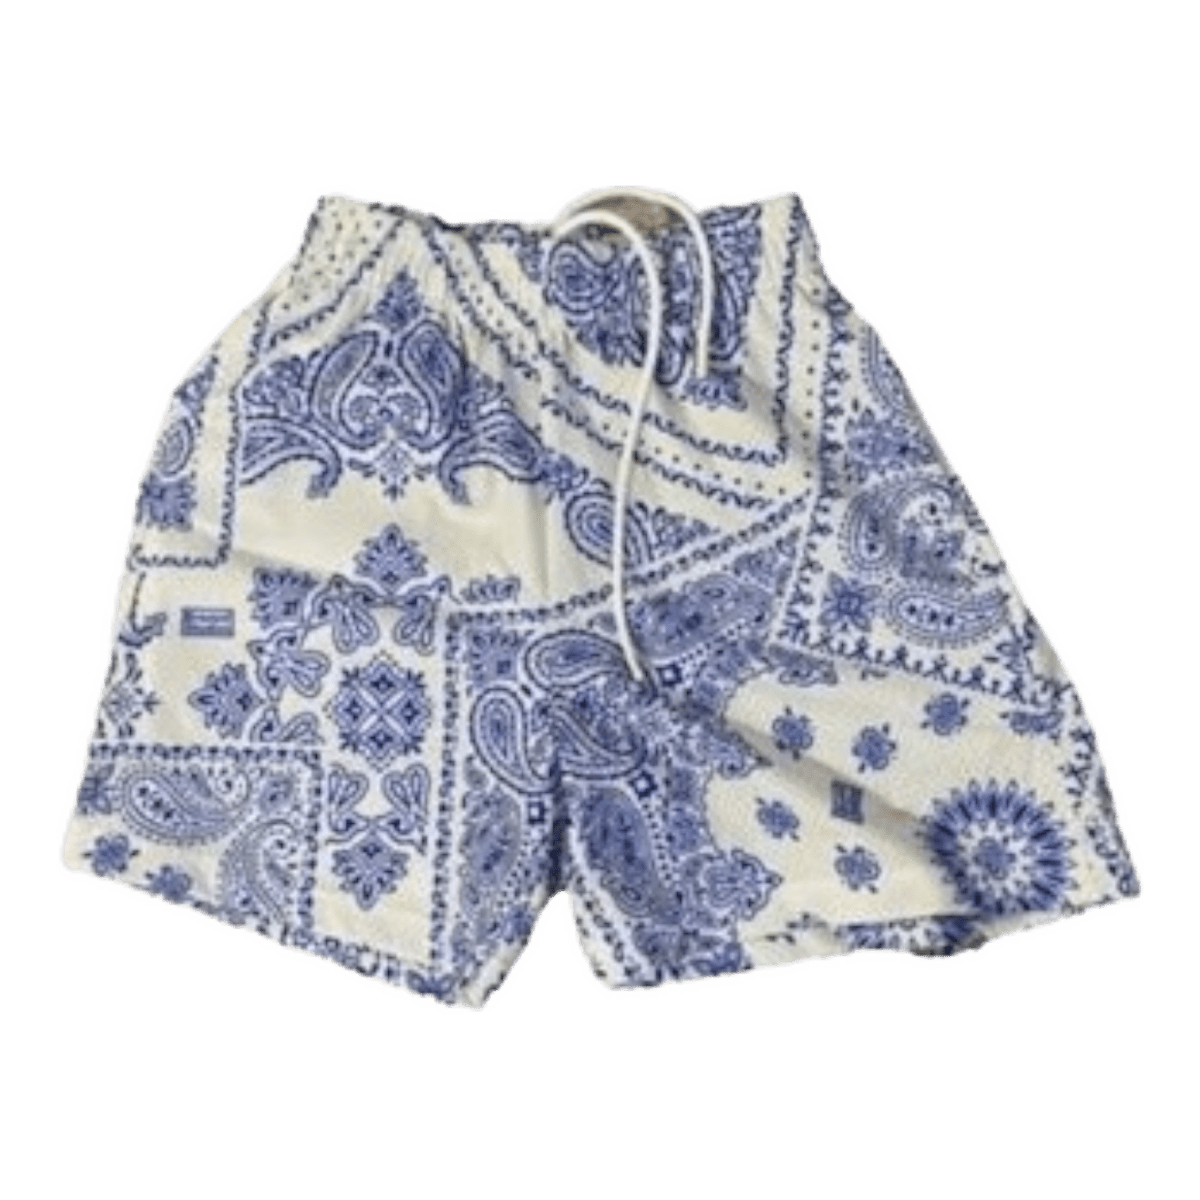 Bravest Studios Royal Cream Paisley Player Shorts - Shorts - Jawns on Fire Sneakers & Streetwear